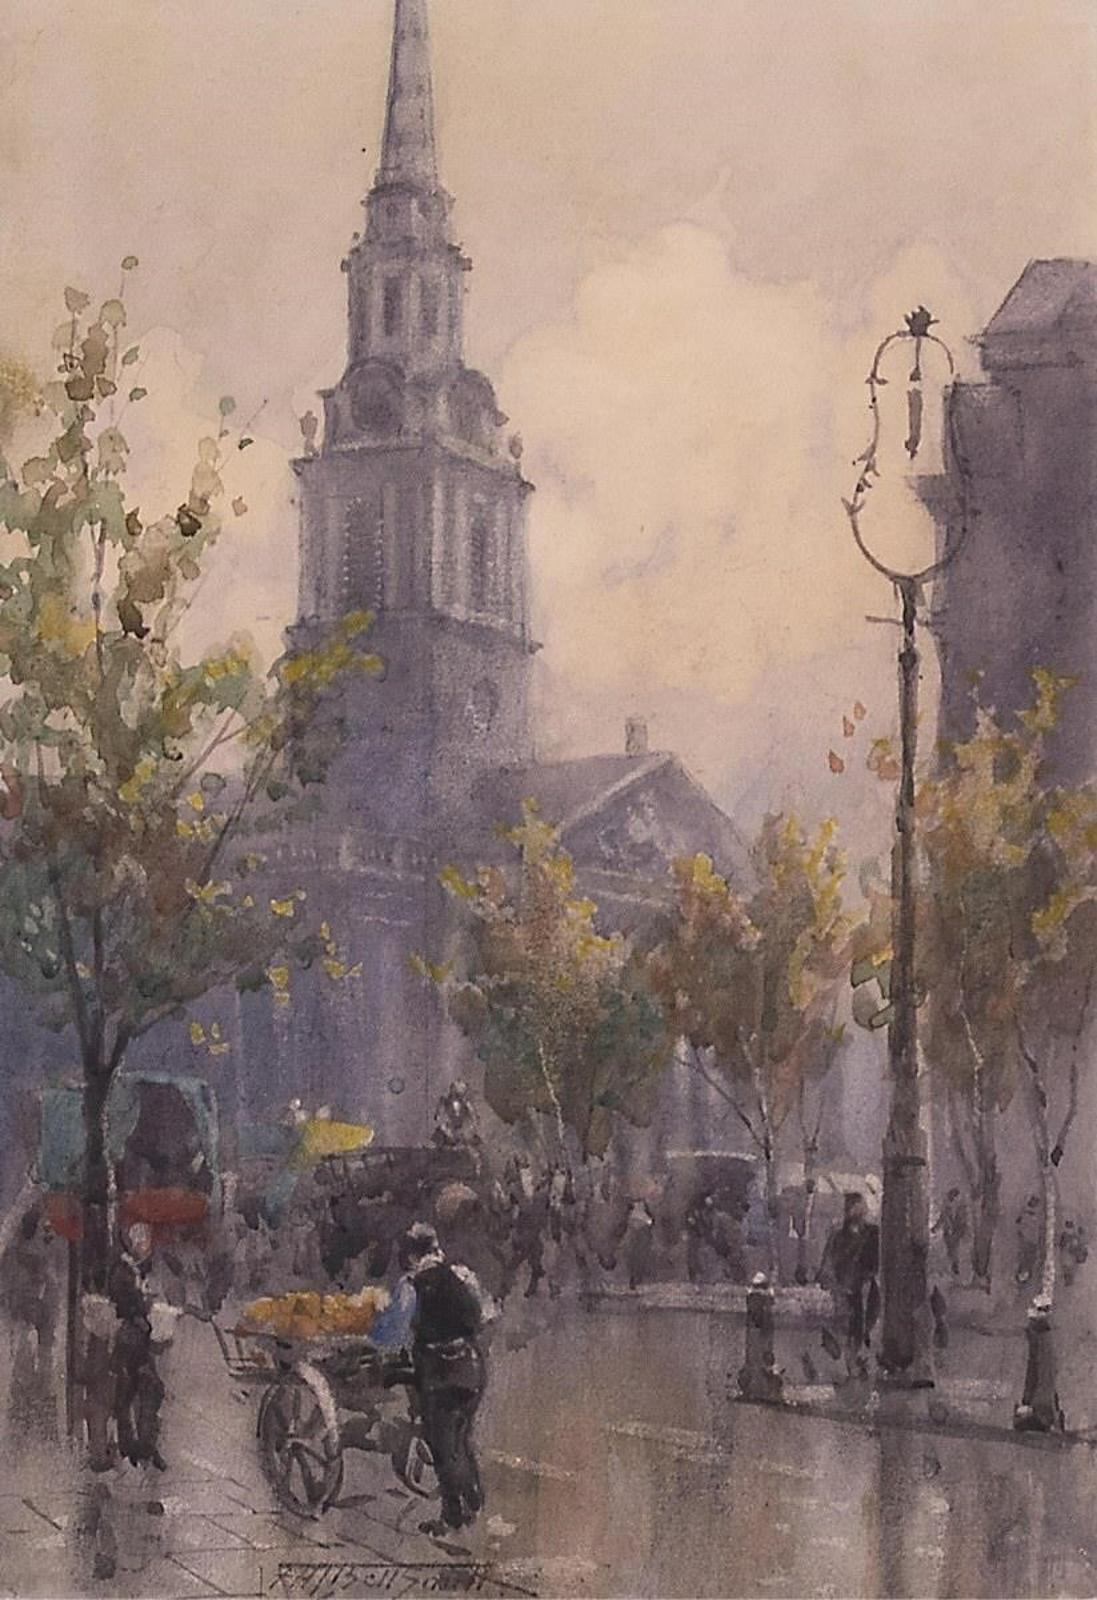 Frederic Martlett Bell-Smith (1846-1923) - St. Martin In The Fields Church, London